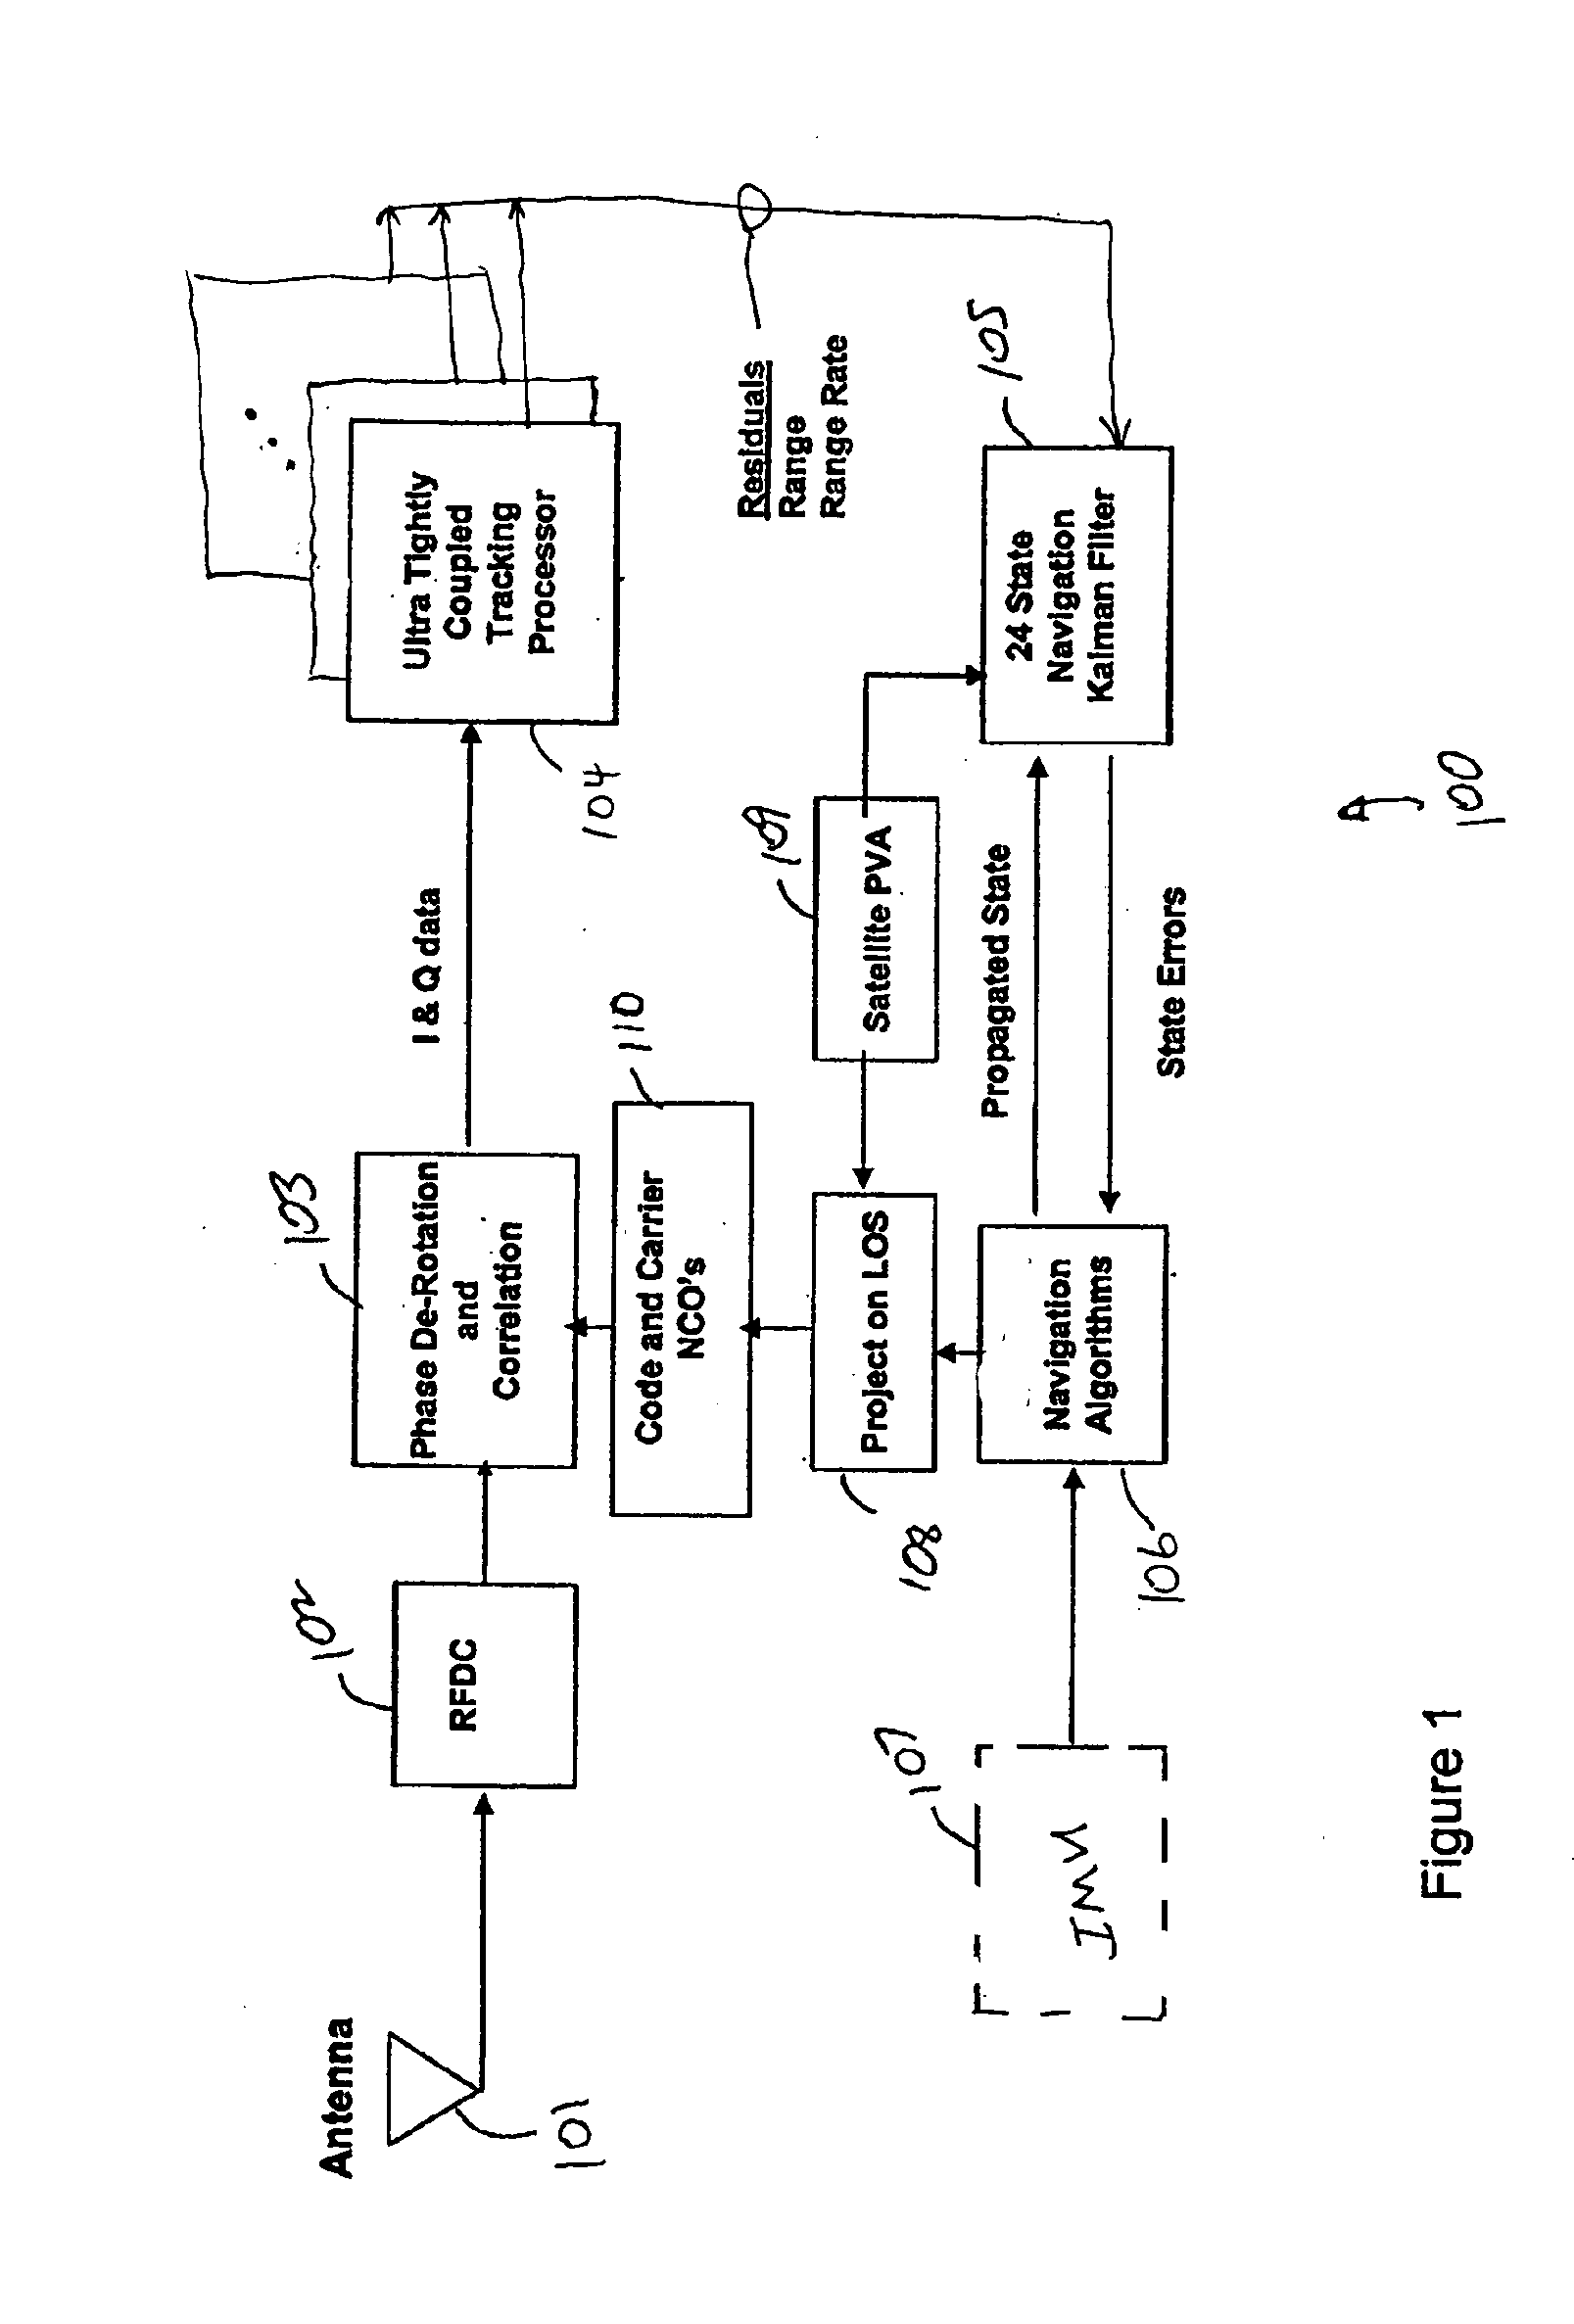 System and method for GPS acquisition using advanced tight coupling